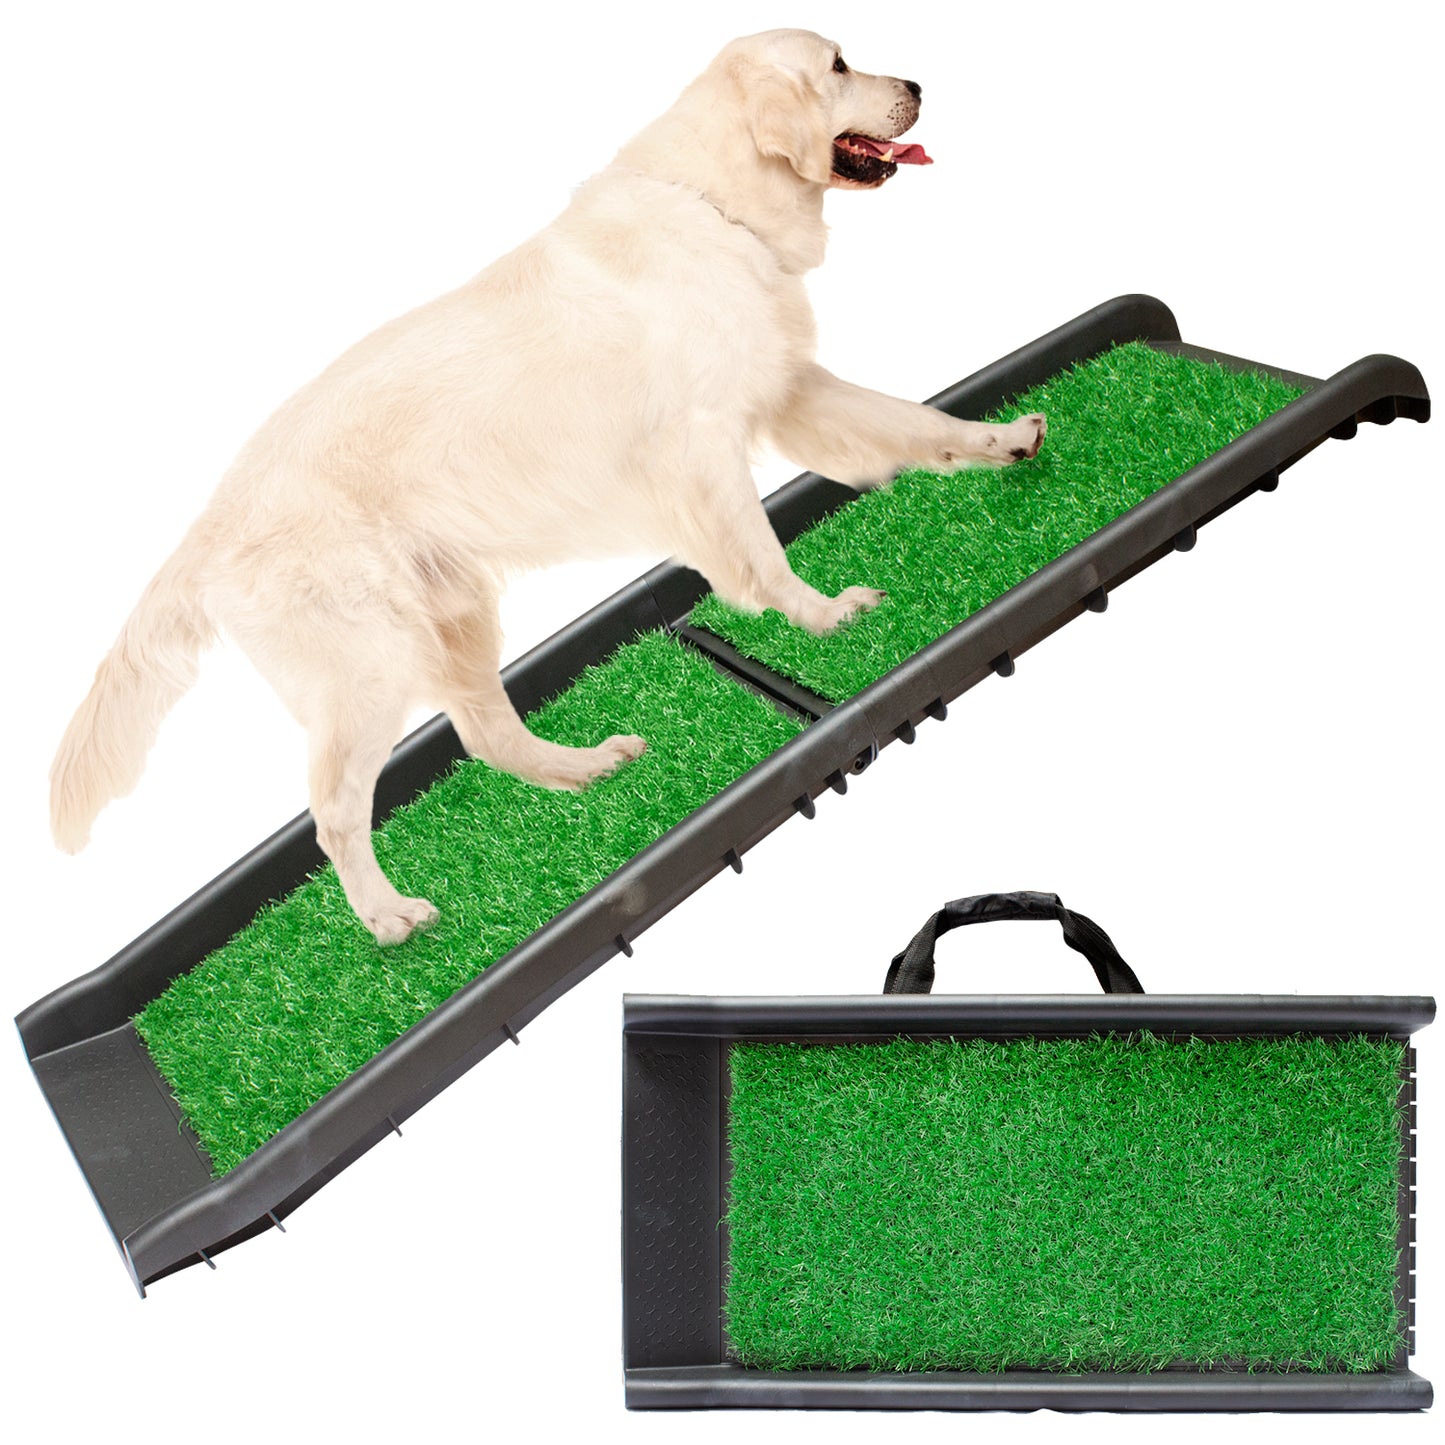 Foldable Ramp for Dogs - Safe Pet Travel Ramp - Multi-Material Options